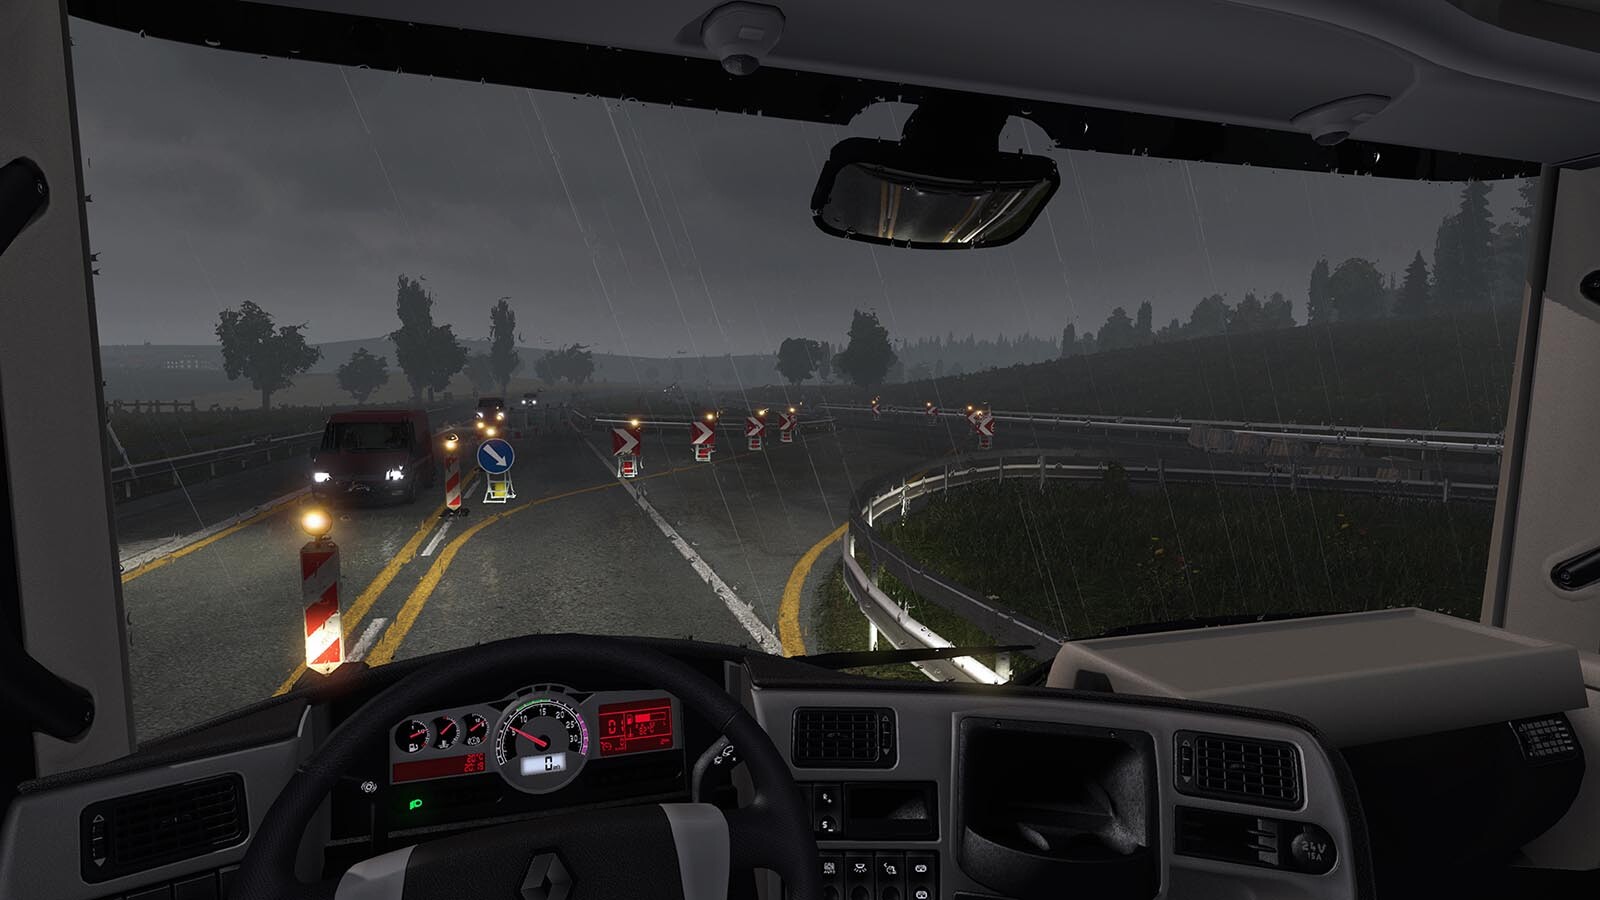 Euro Truck Simulator 2 - Going East! Steam Key for PC, Mac and Linux - Buy  now